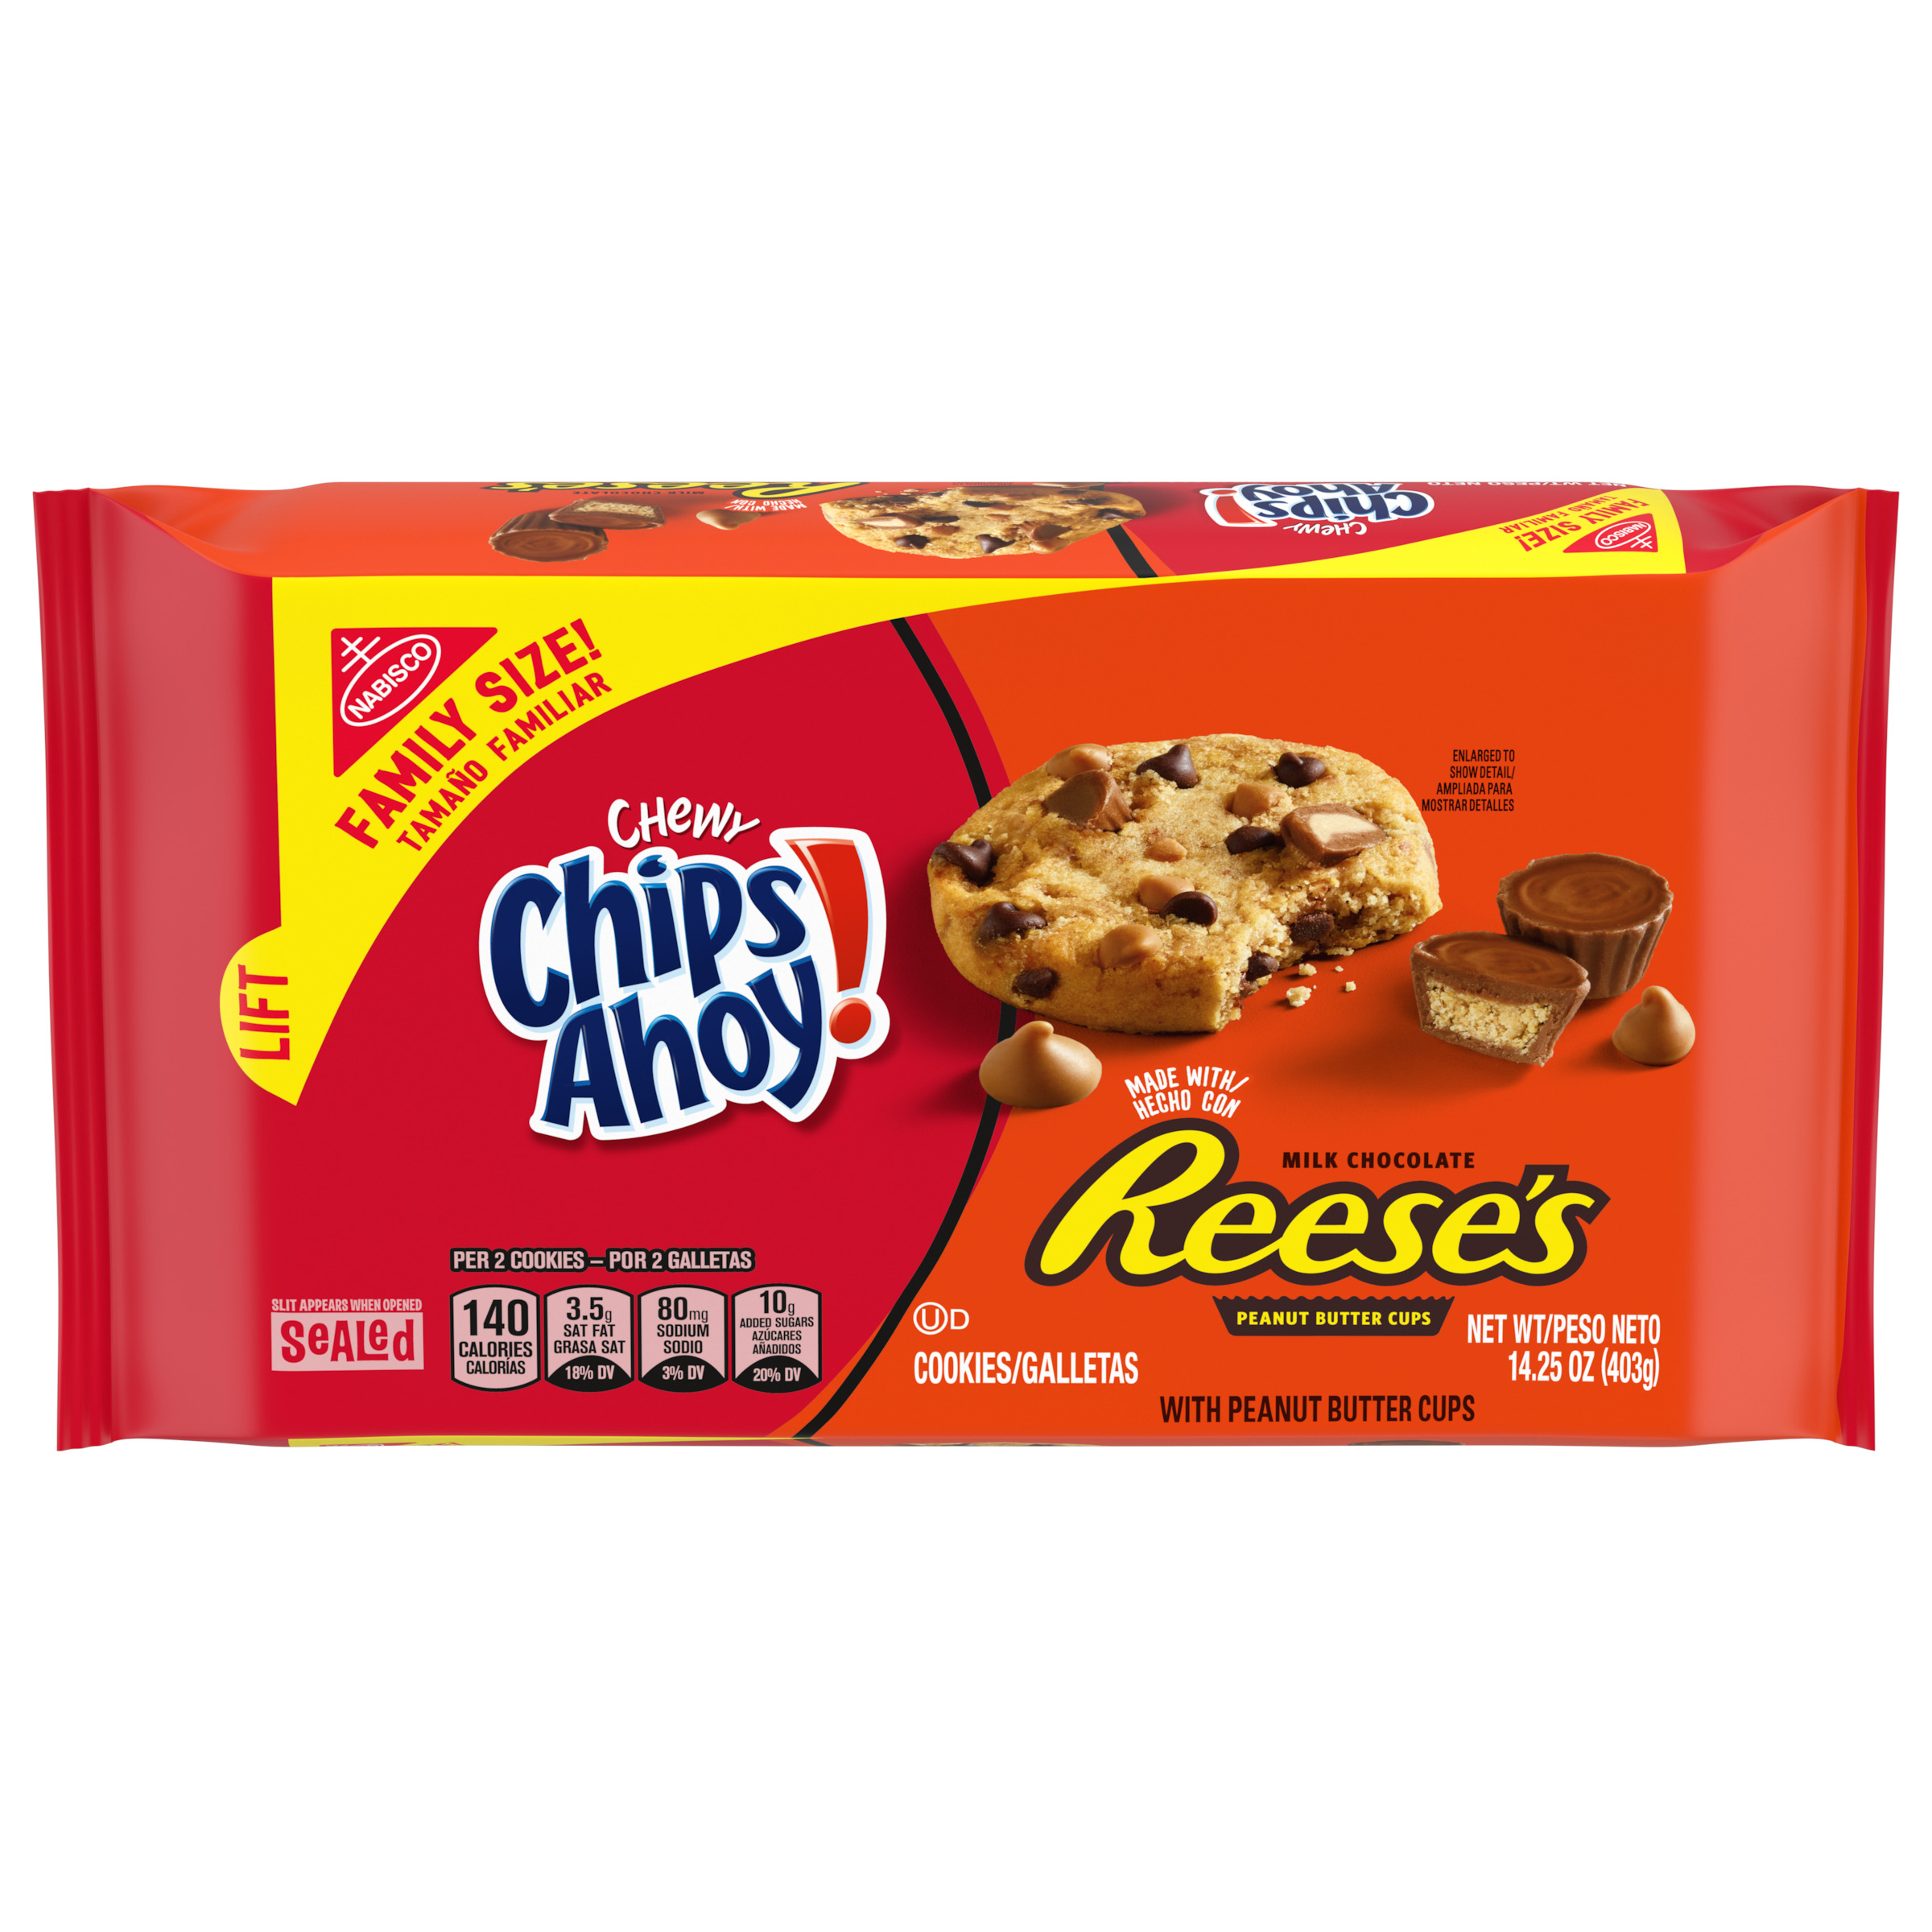 CHIPS AHOY! Chewy Chocolate Chip Cookies with Reese's Peanut Butter Cups, Family Size, 14.25 oz-thumbnail-1